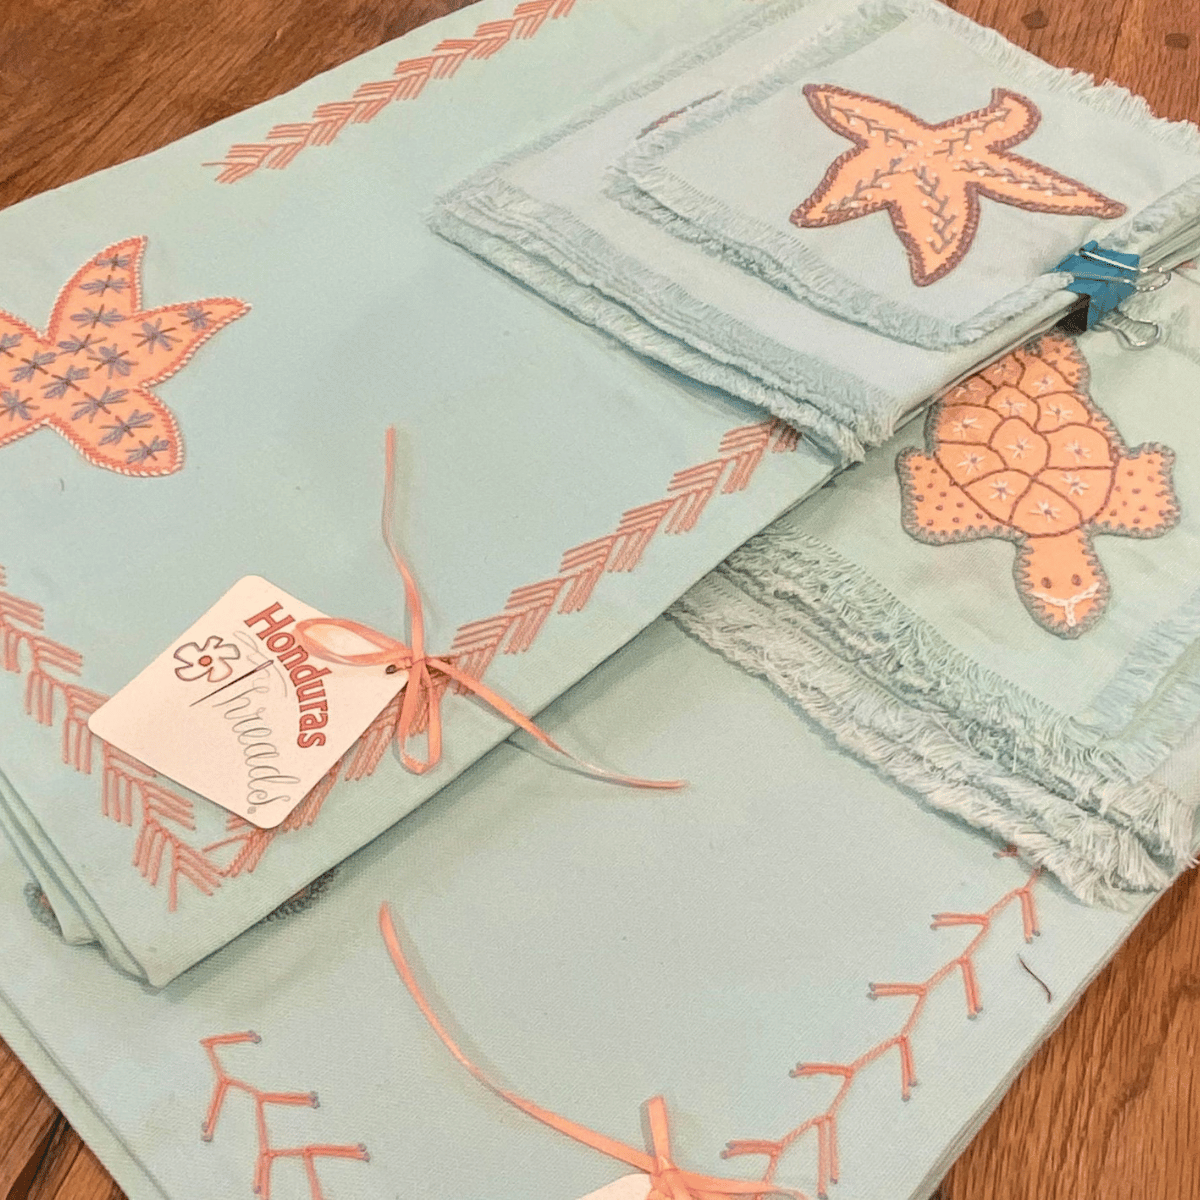 Hand-embroidered place mats for your table